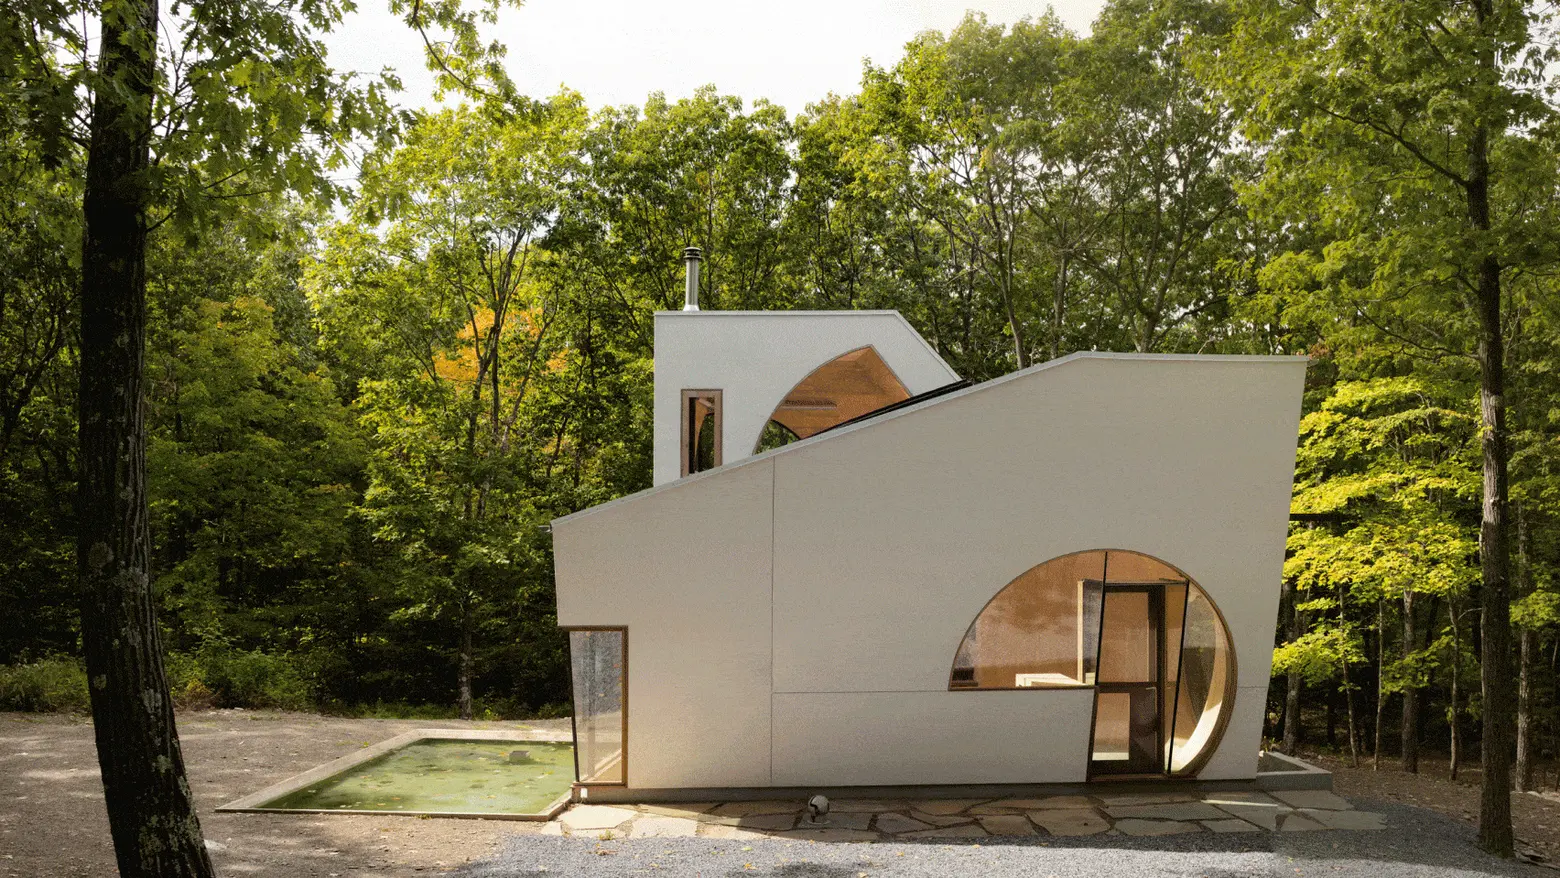 Steven Holl’s Upstate ‘Ex of In House’ is an experiment in voids and sense of place